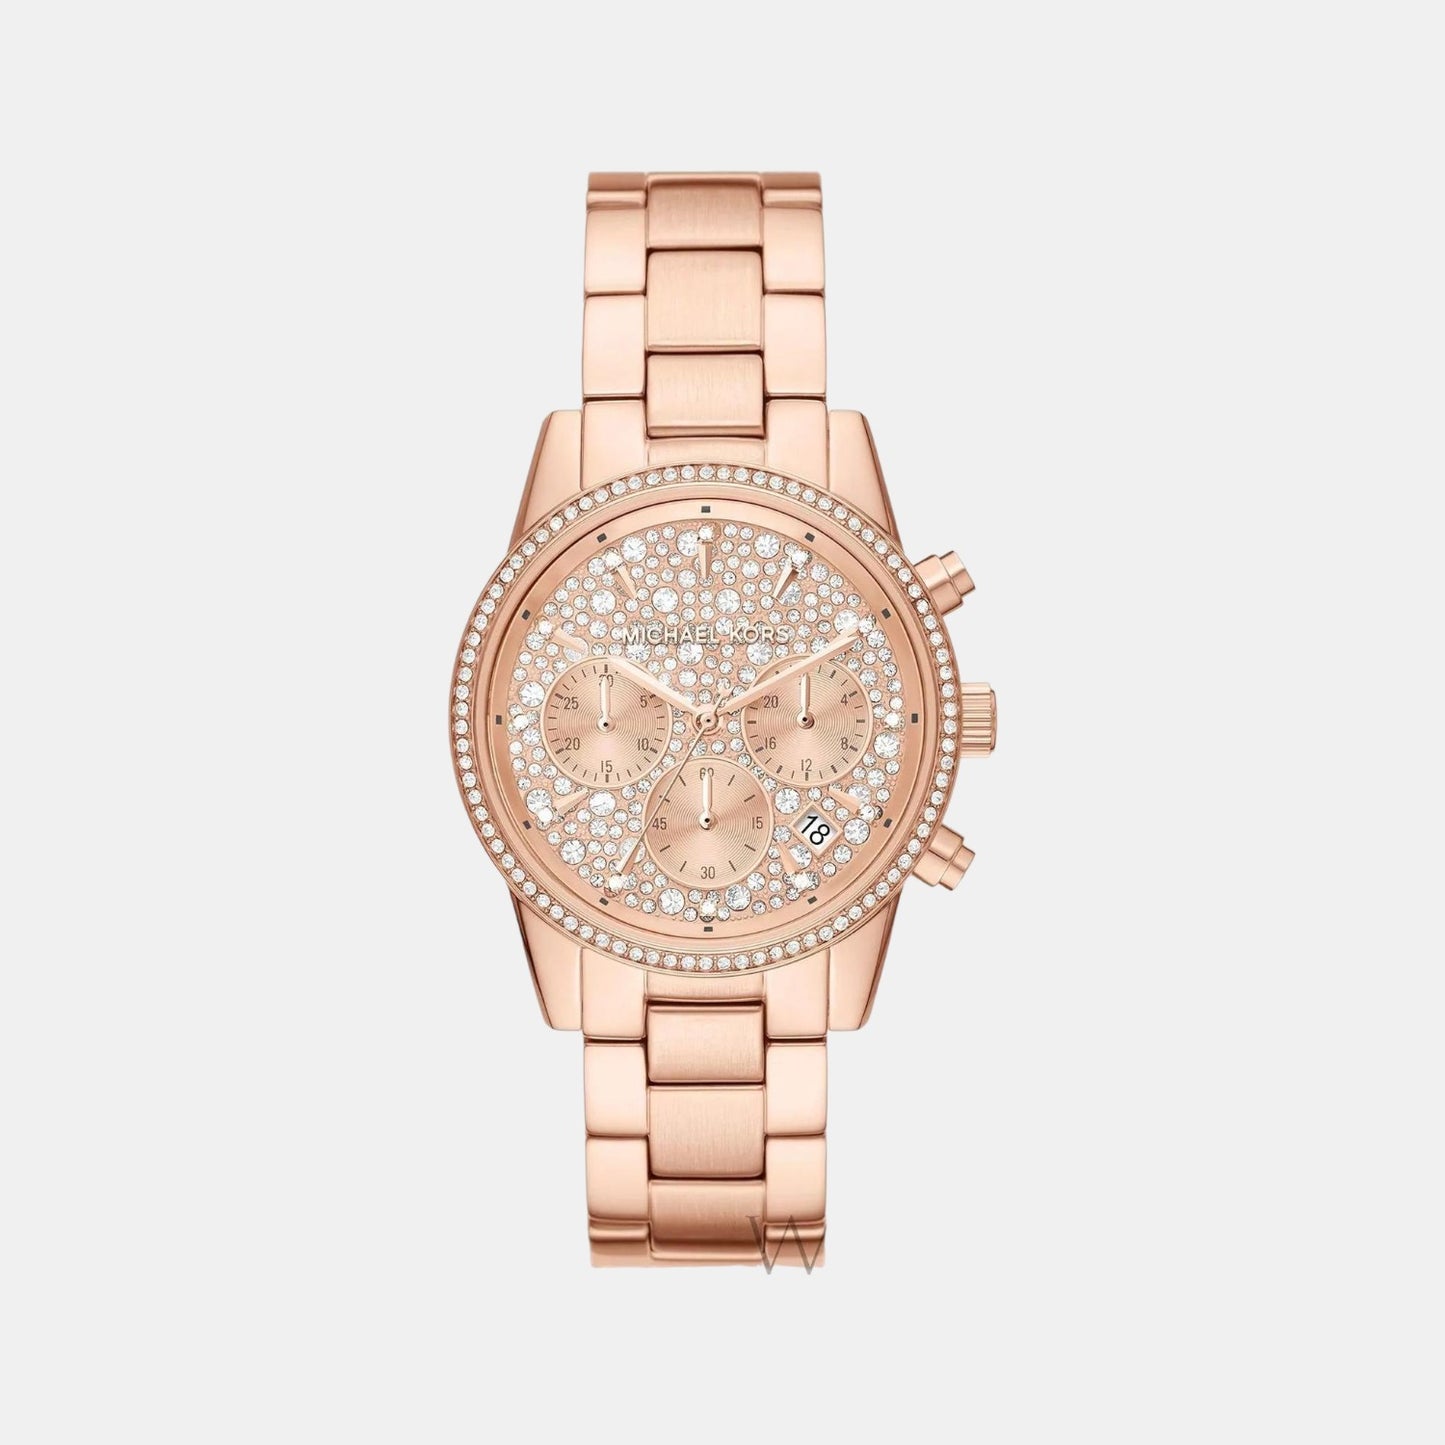 Female Rose Gold Stainless Steel Chronograph Watch MK7302